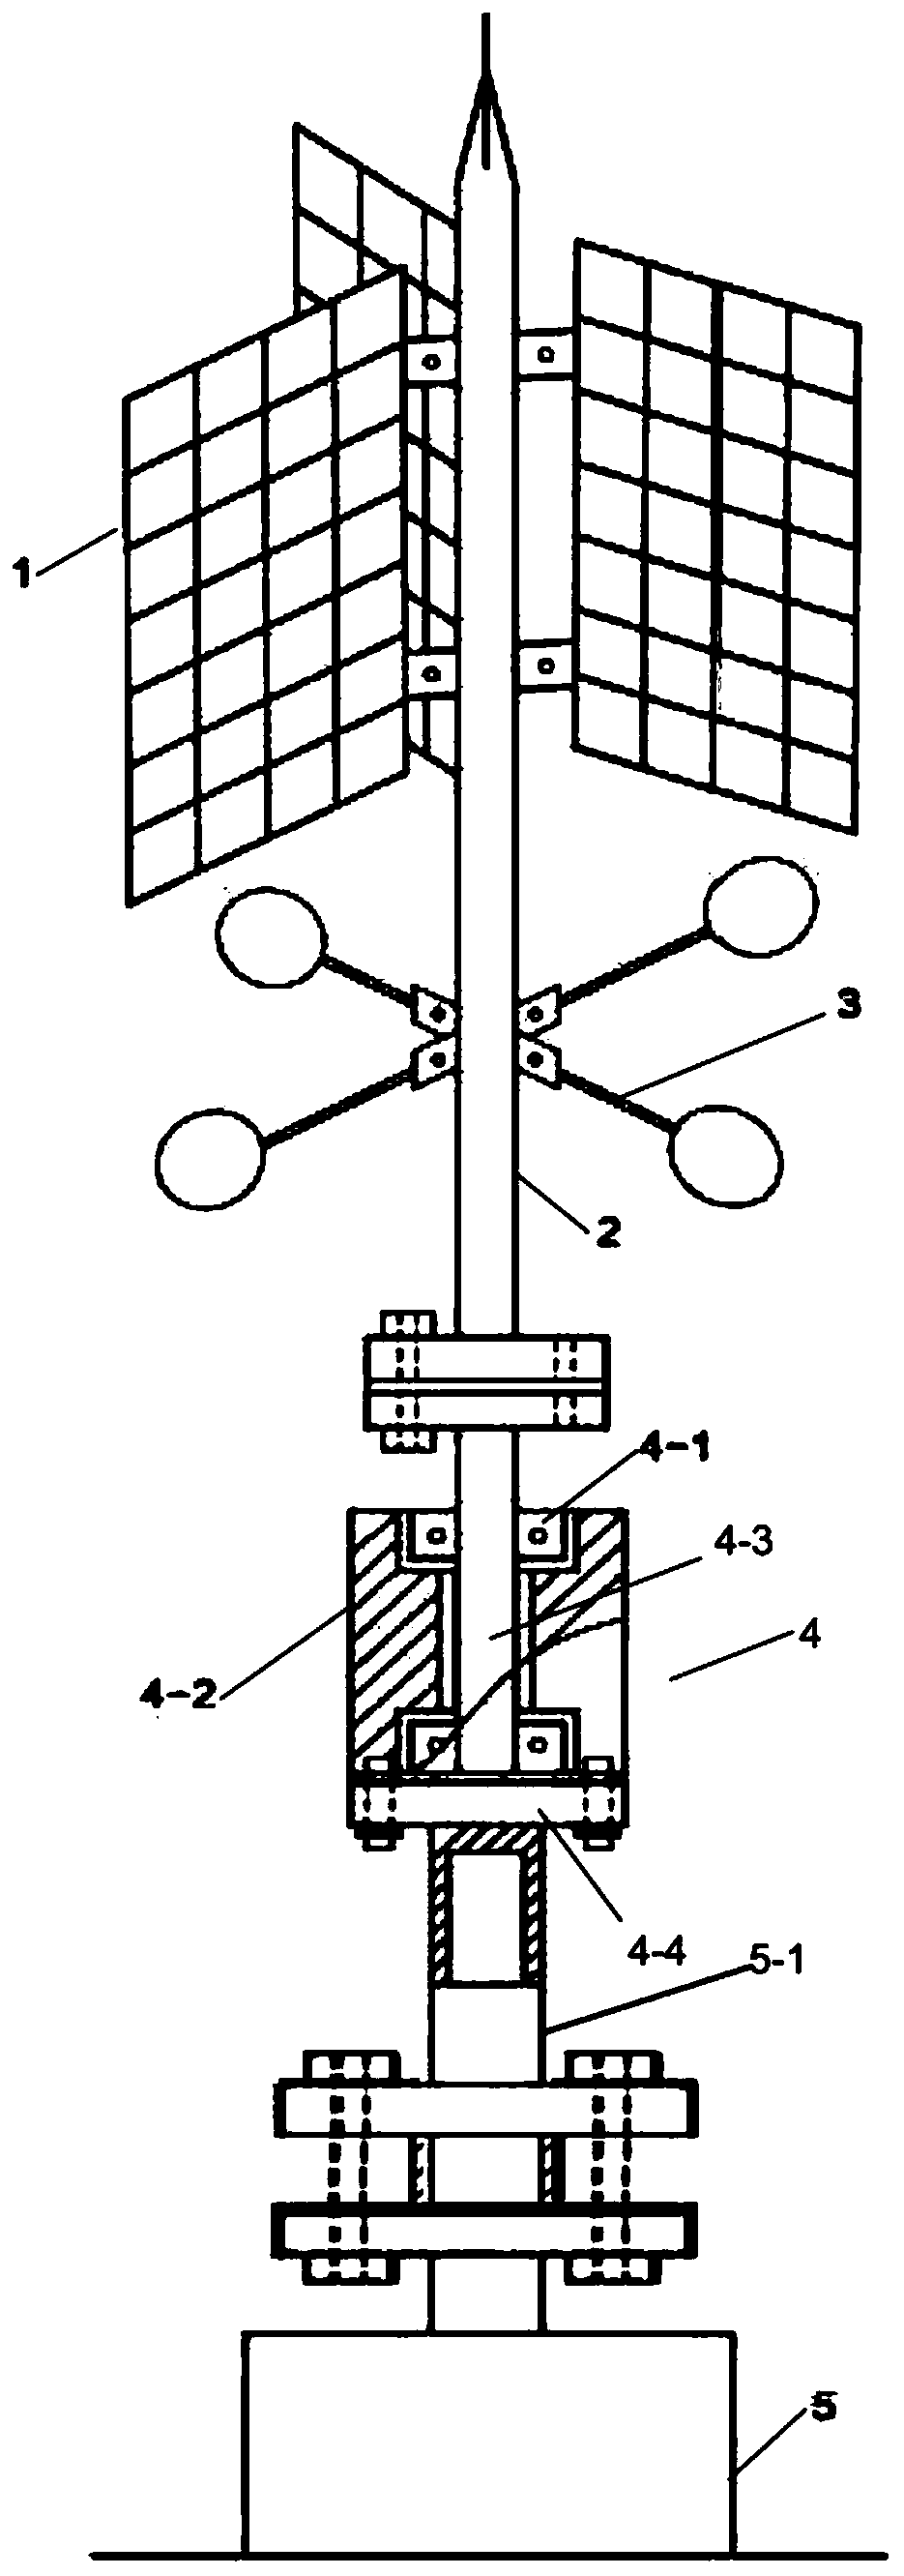 Lightning protection and elimination device for oil well platform